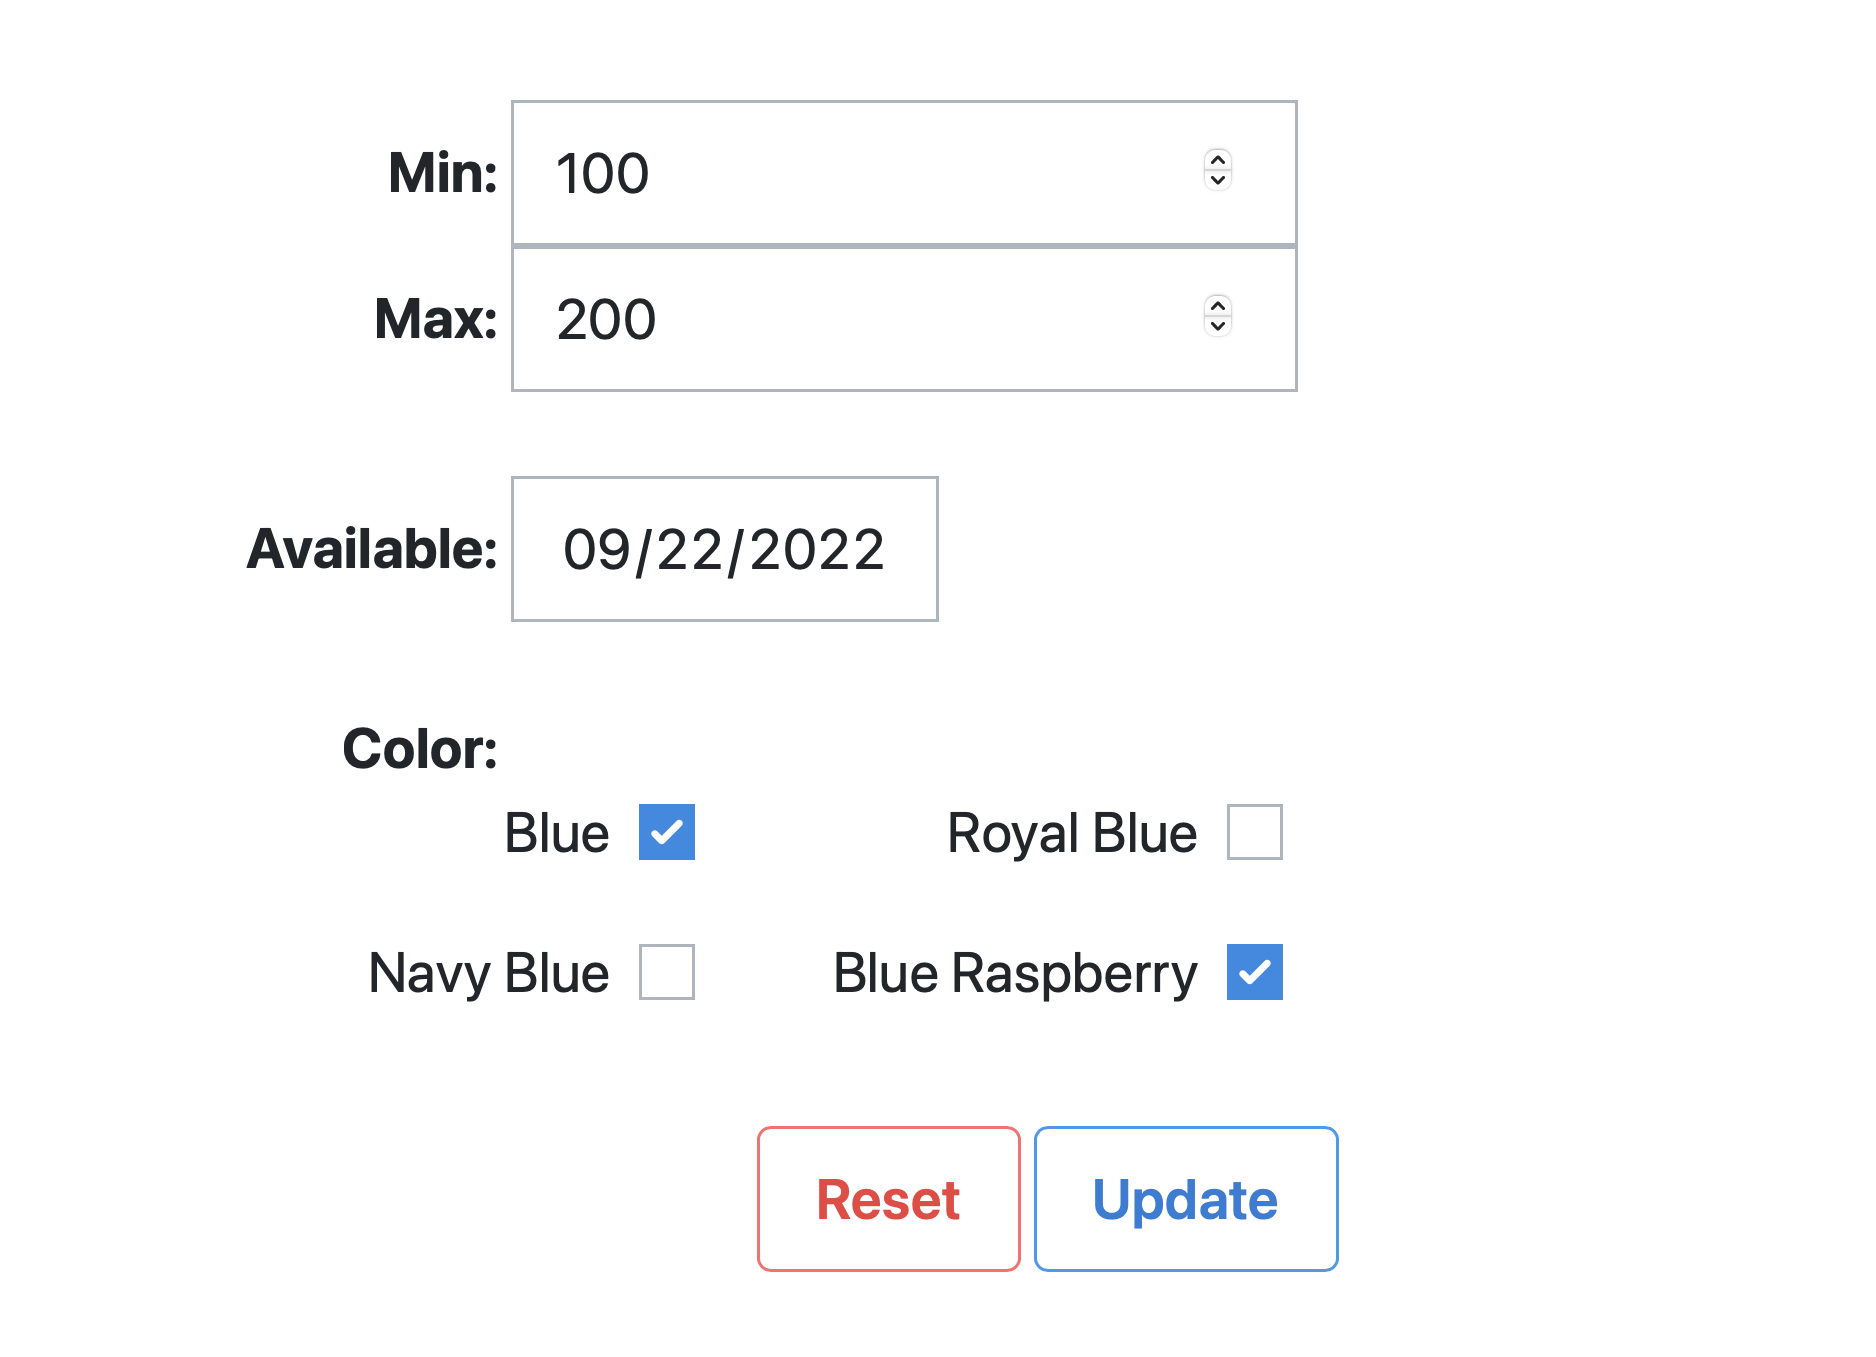 A form with price, color, and date filters